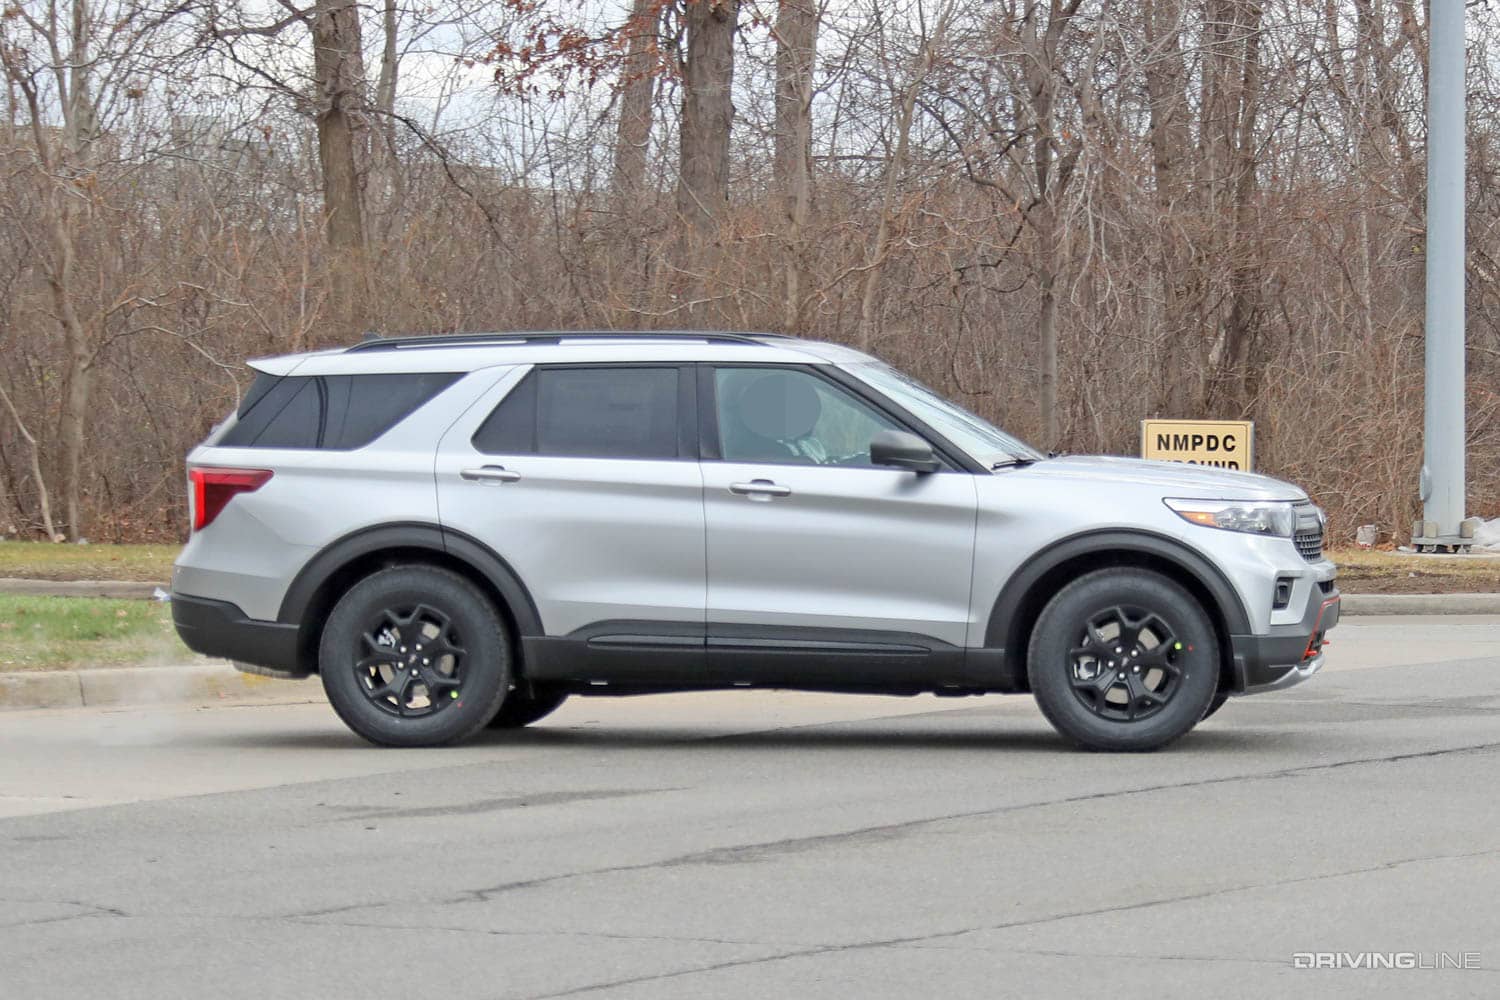 Off-Road 2022 Ford Explorer Timberline Spy Photos | DrivingLine